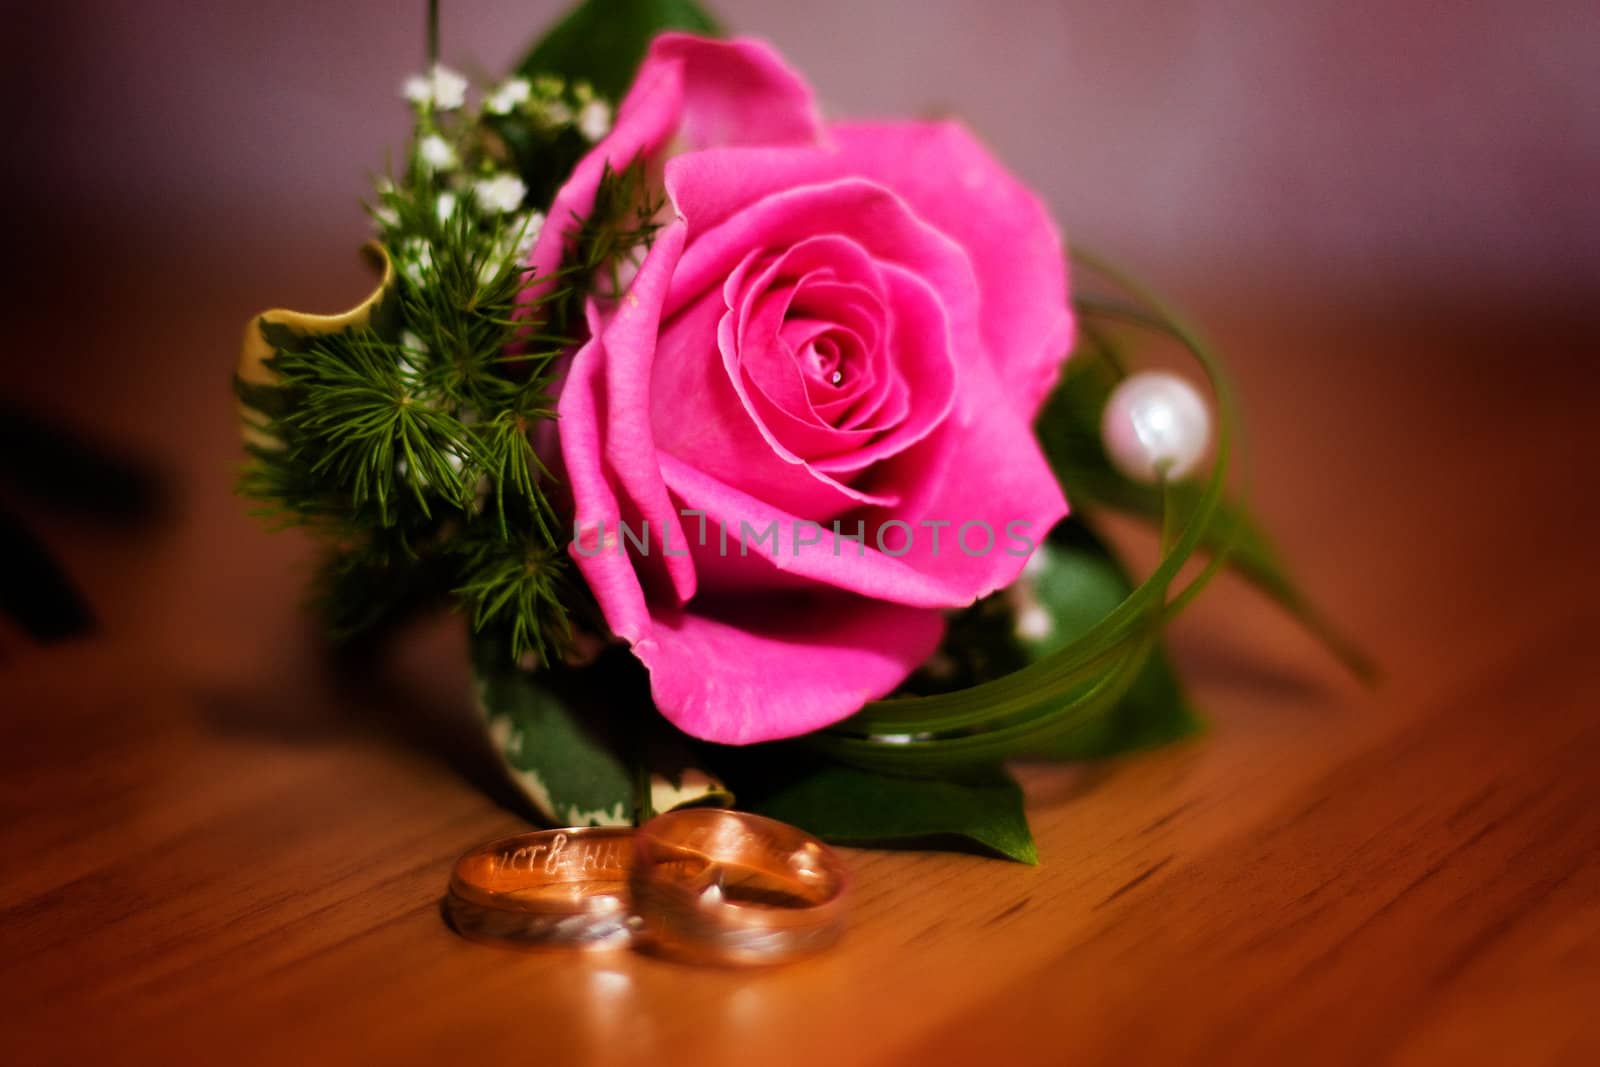 flower and wedding rings